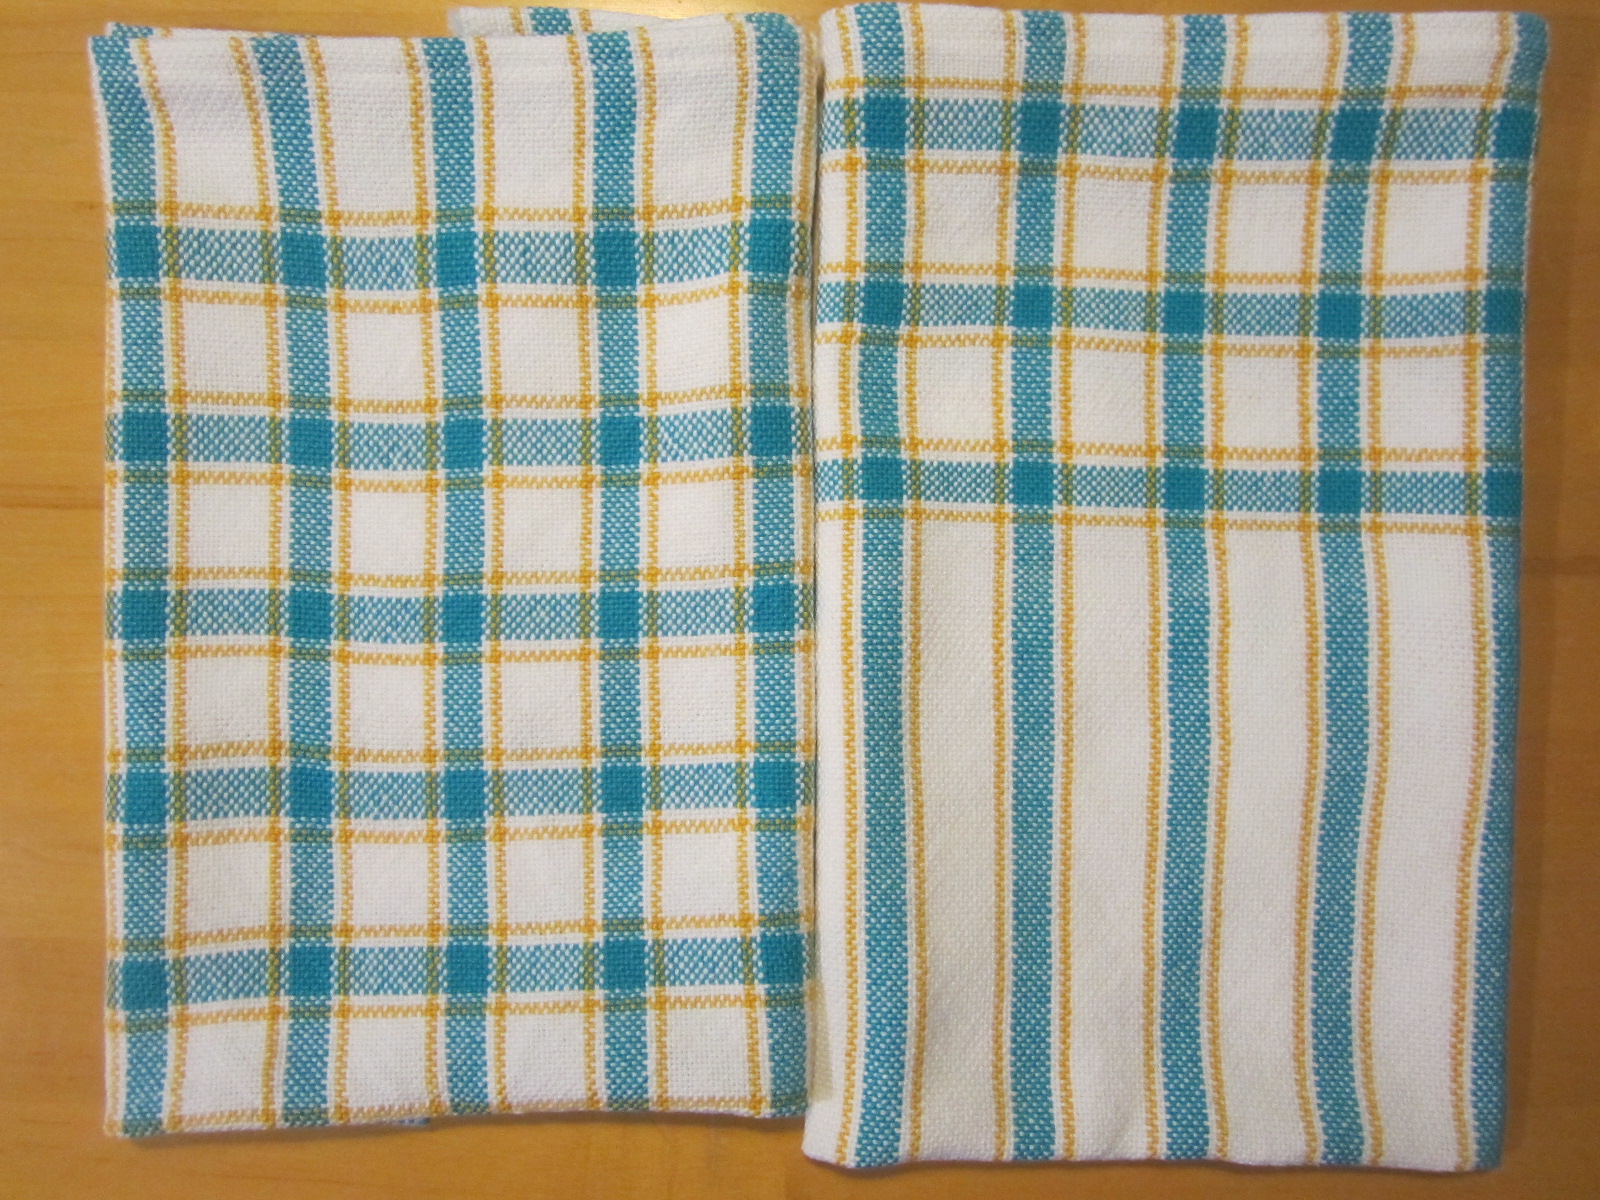 My two hand-woven towels